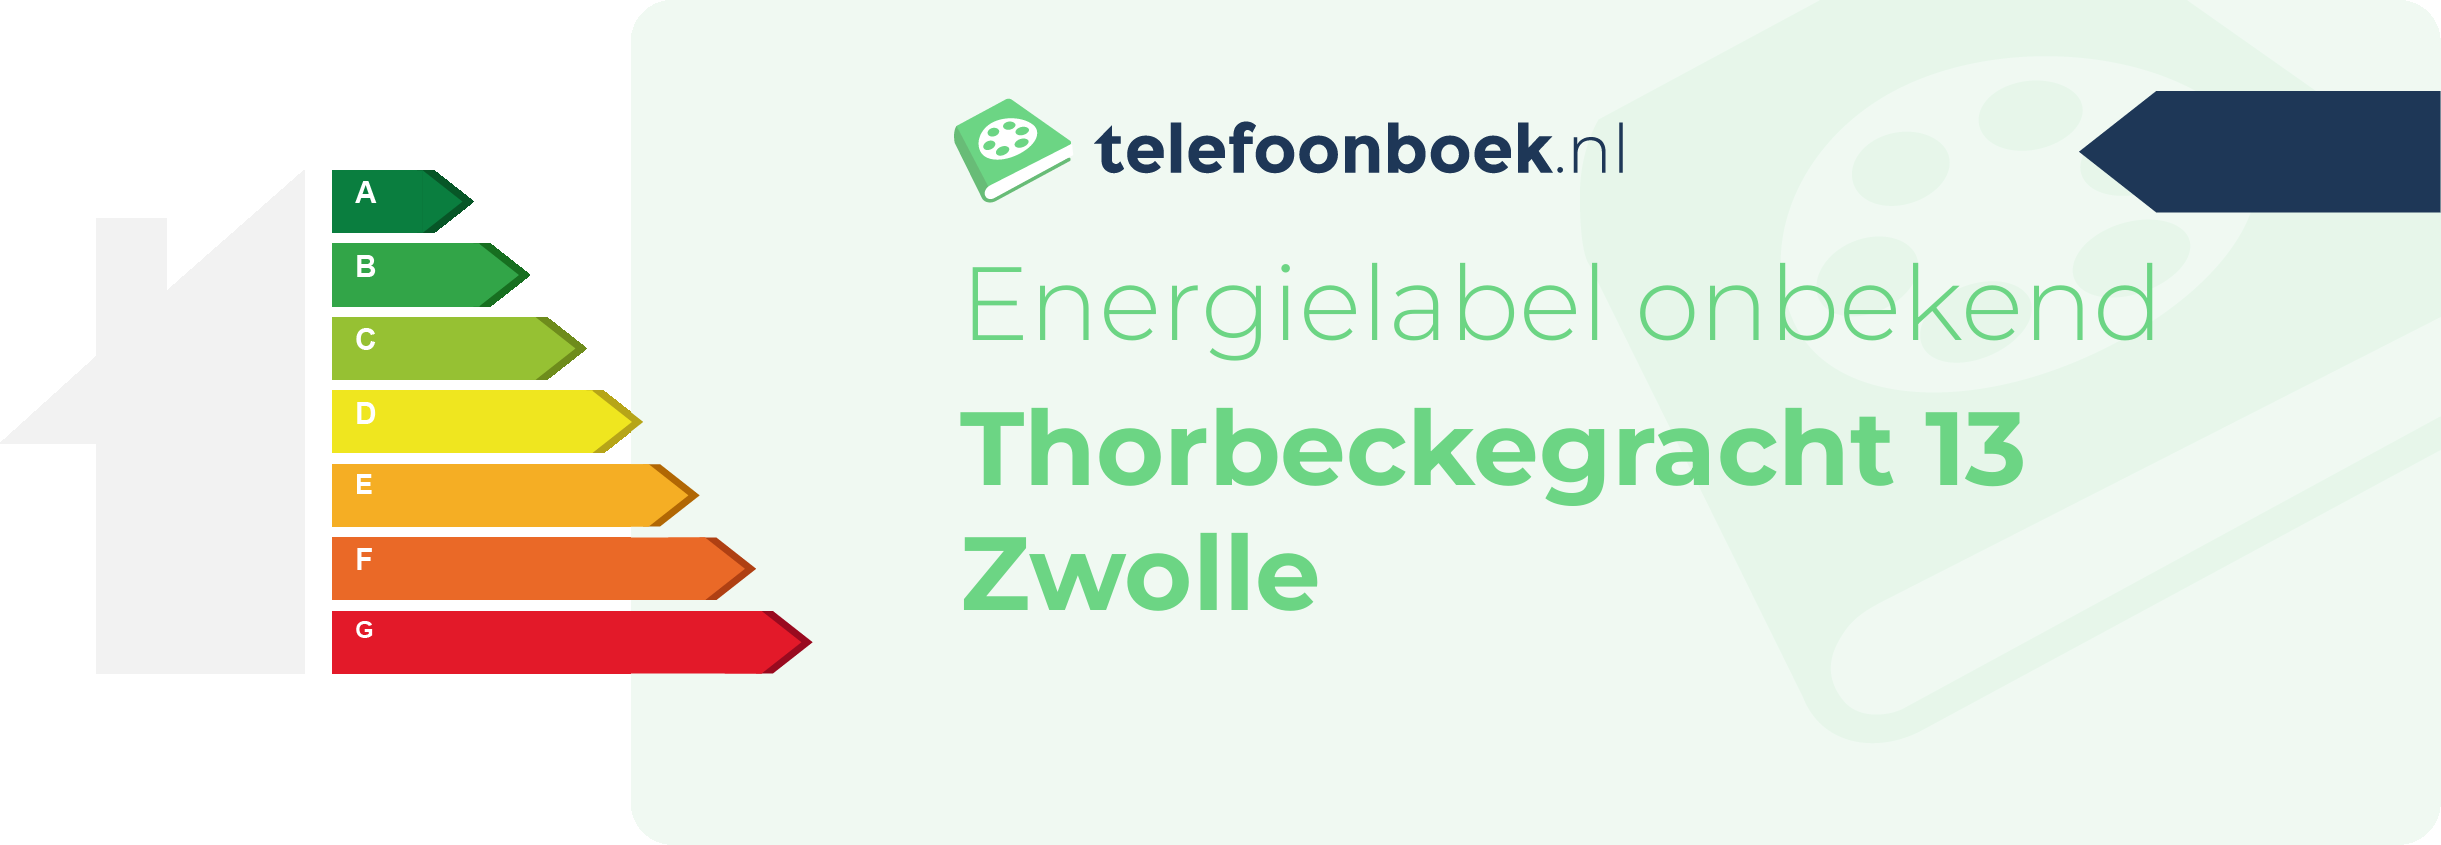 Energielabel Thorbeckegracht 13 Zwolle